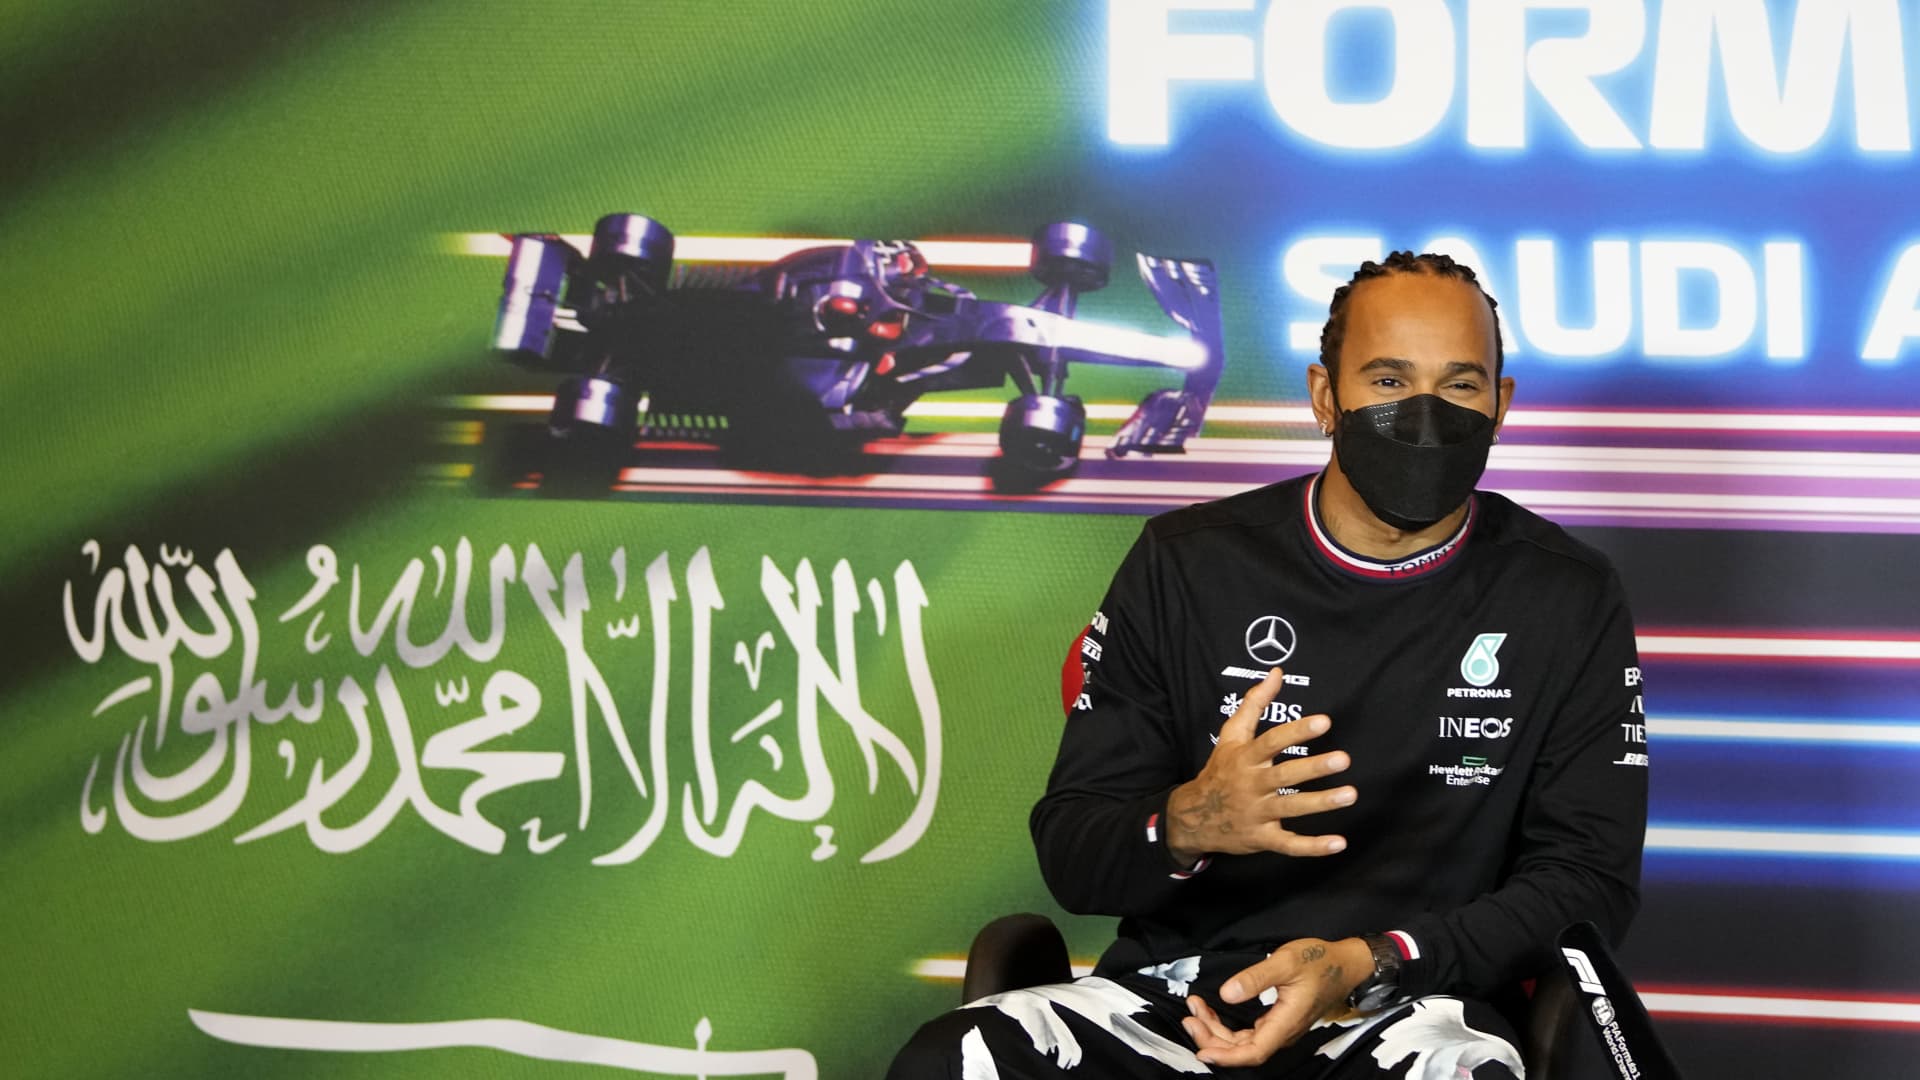 Jeddah, SAUDI ARABIA: Lewis Hamilton of Great Britain and Mercedes GP talks in the Drivers Press Conference during previews ahead of the F1 Grand Prix of Saudi Arabia at Jeddah Corniche Circuit on December 02, 2021.